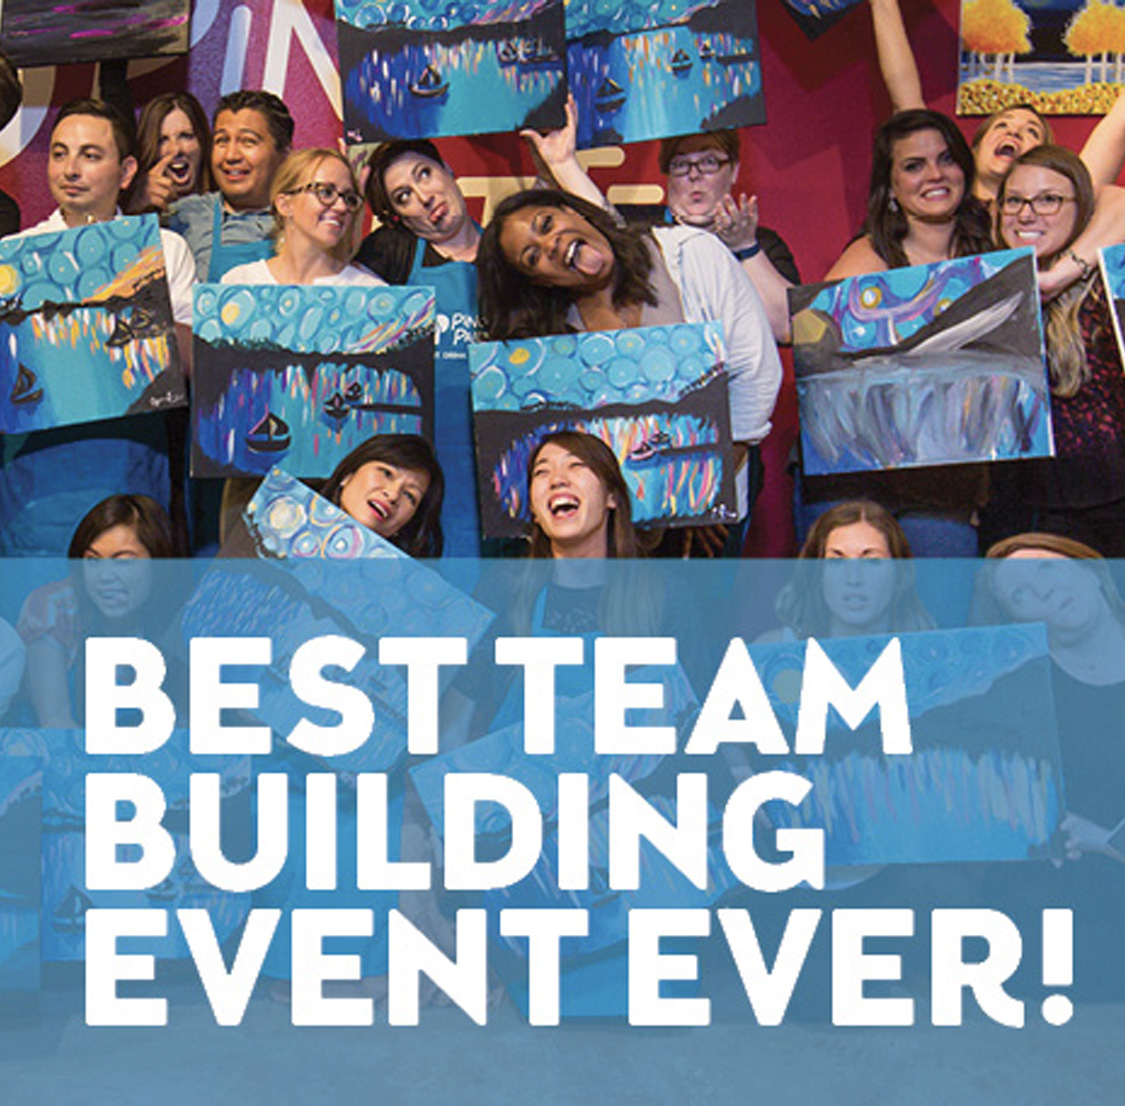 SET WORK ASIDE FOR A MINUTE. LET'S CELEBRATE AND HAVE SOME FUN! BOOK A TEAM BUILDING EVENT WITH US.